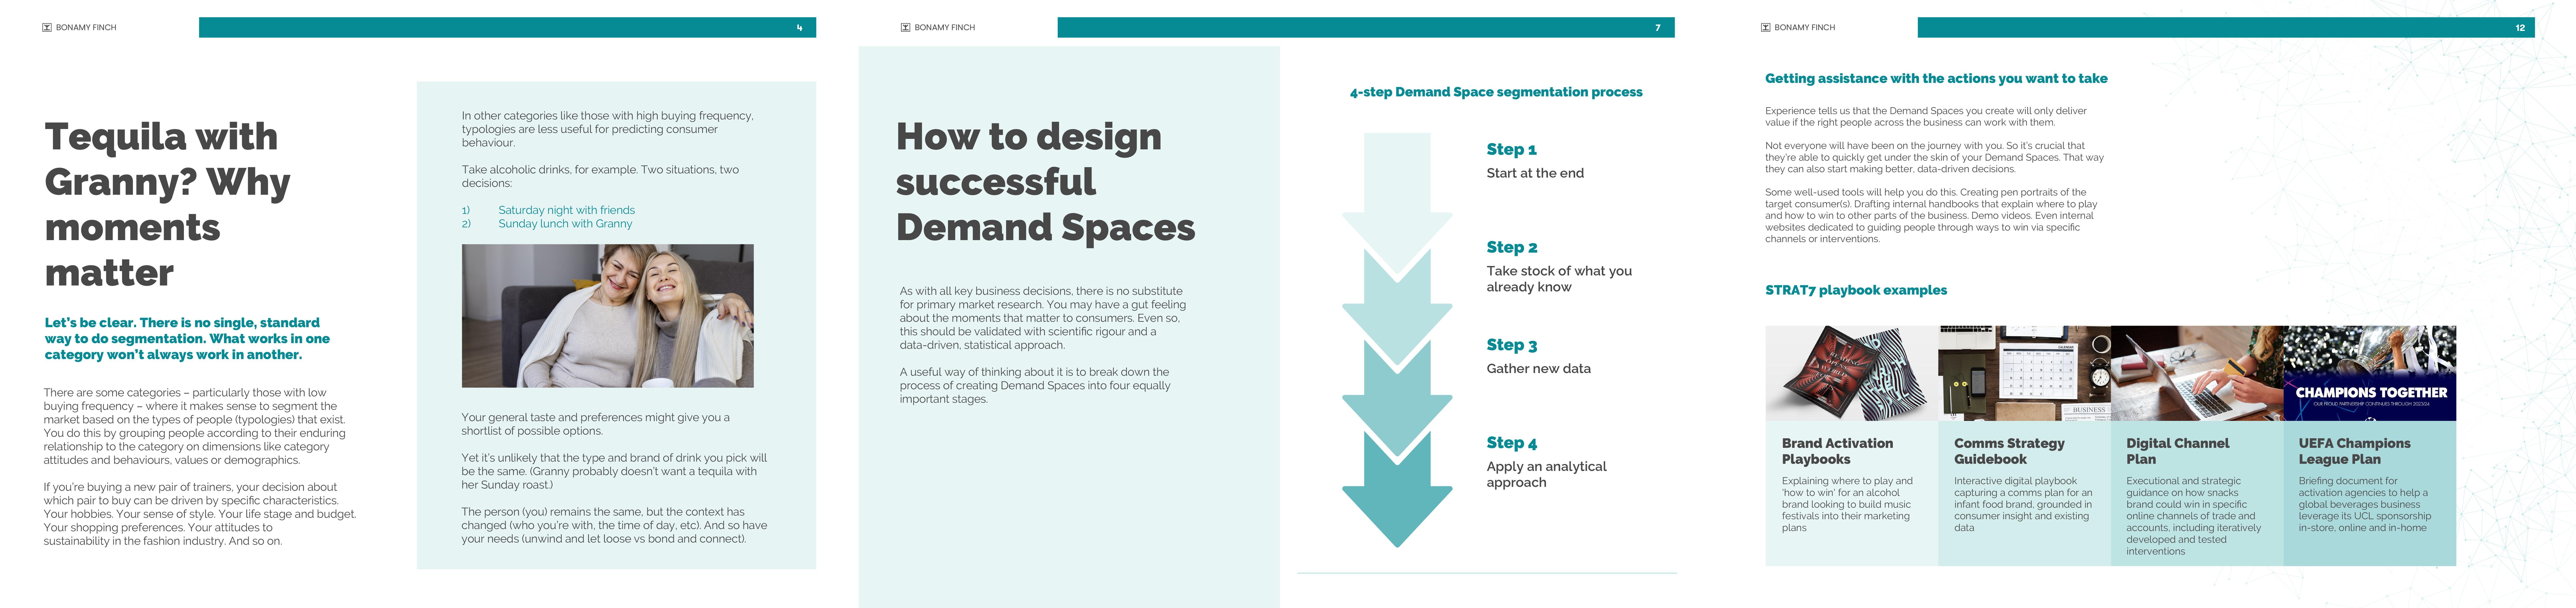 BF ebook_Demand spaces_inside pages